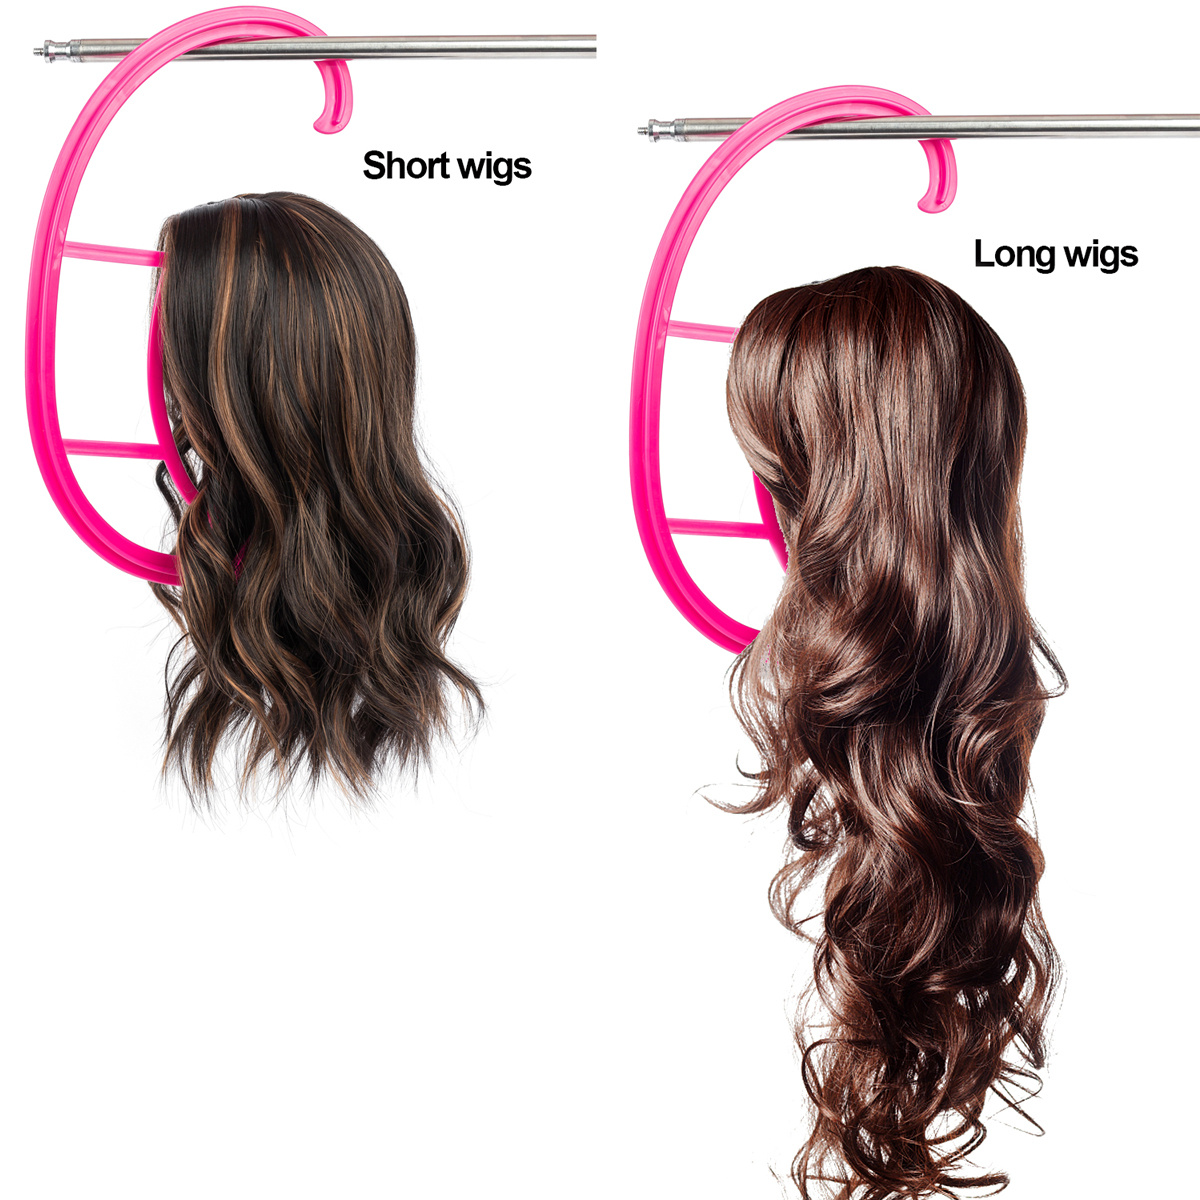 2pcs Wig Stand Folding Professional Wigs Hanger Wig Styling For Hairdresser  Salon - Wig Stands - AliExpress